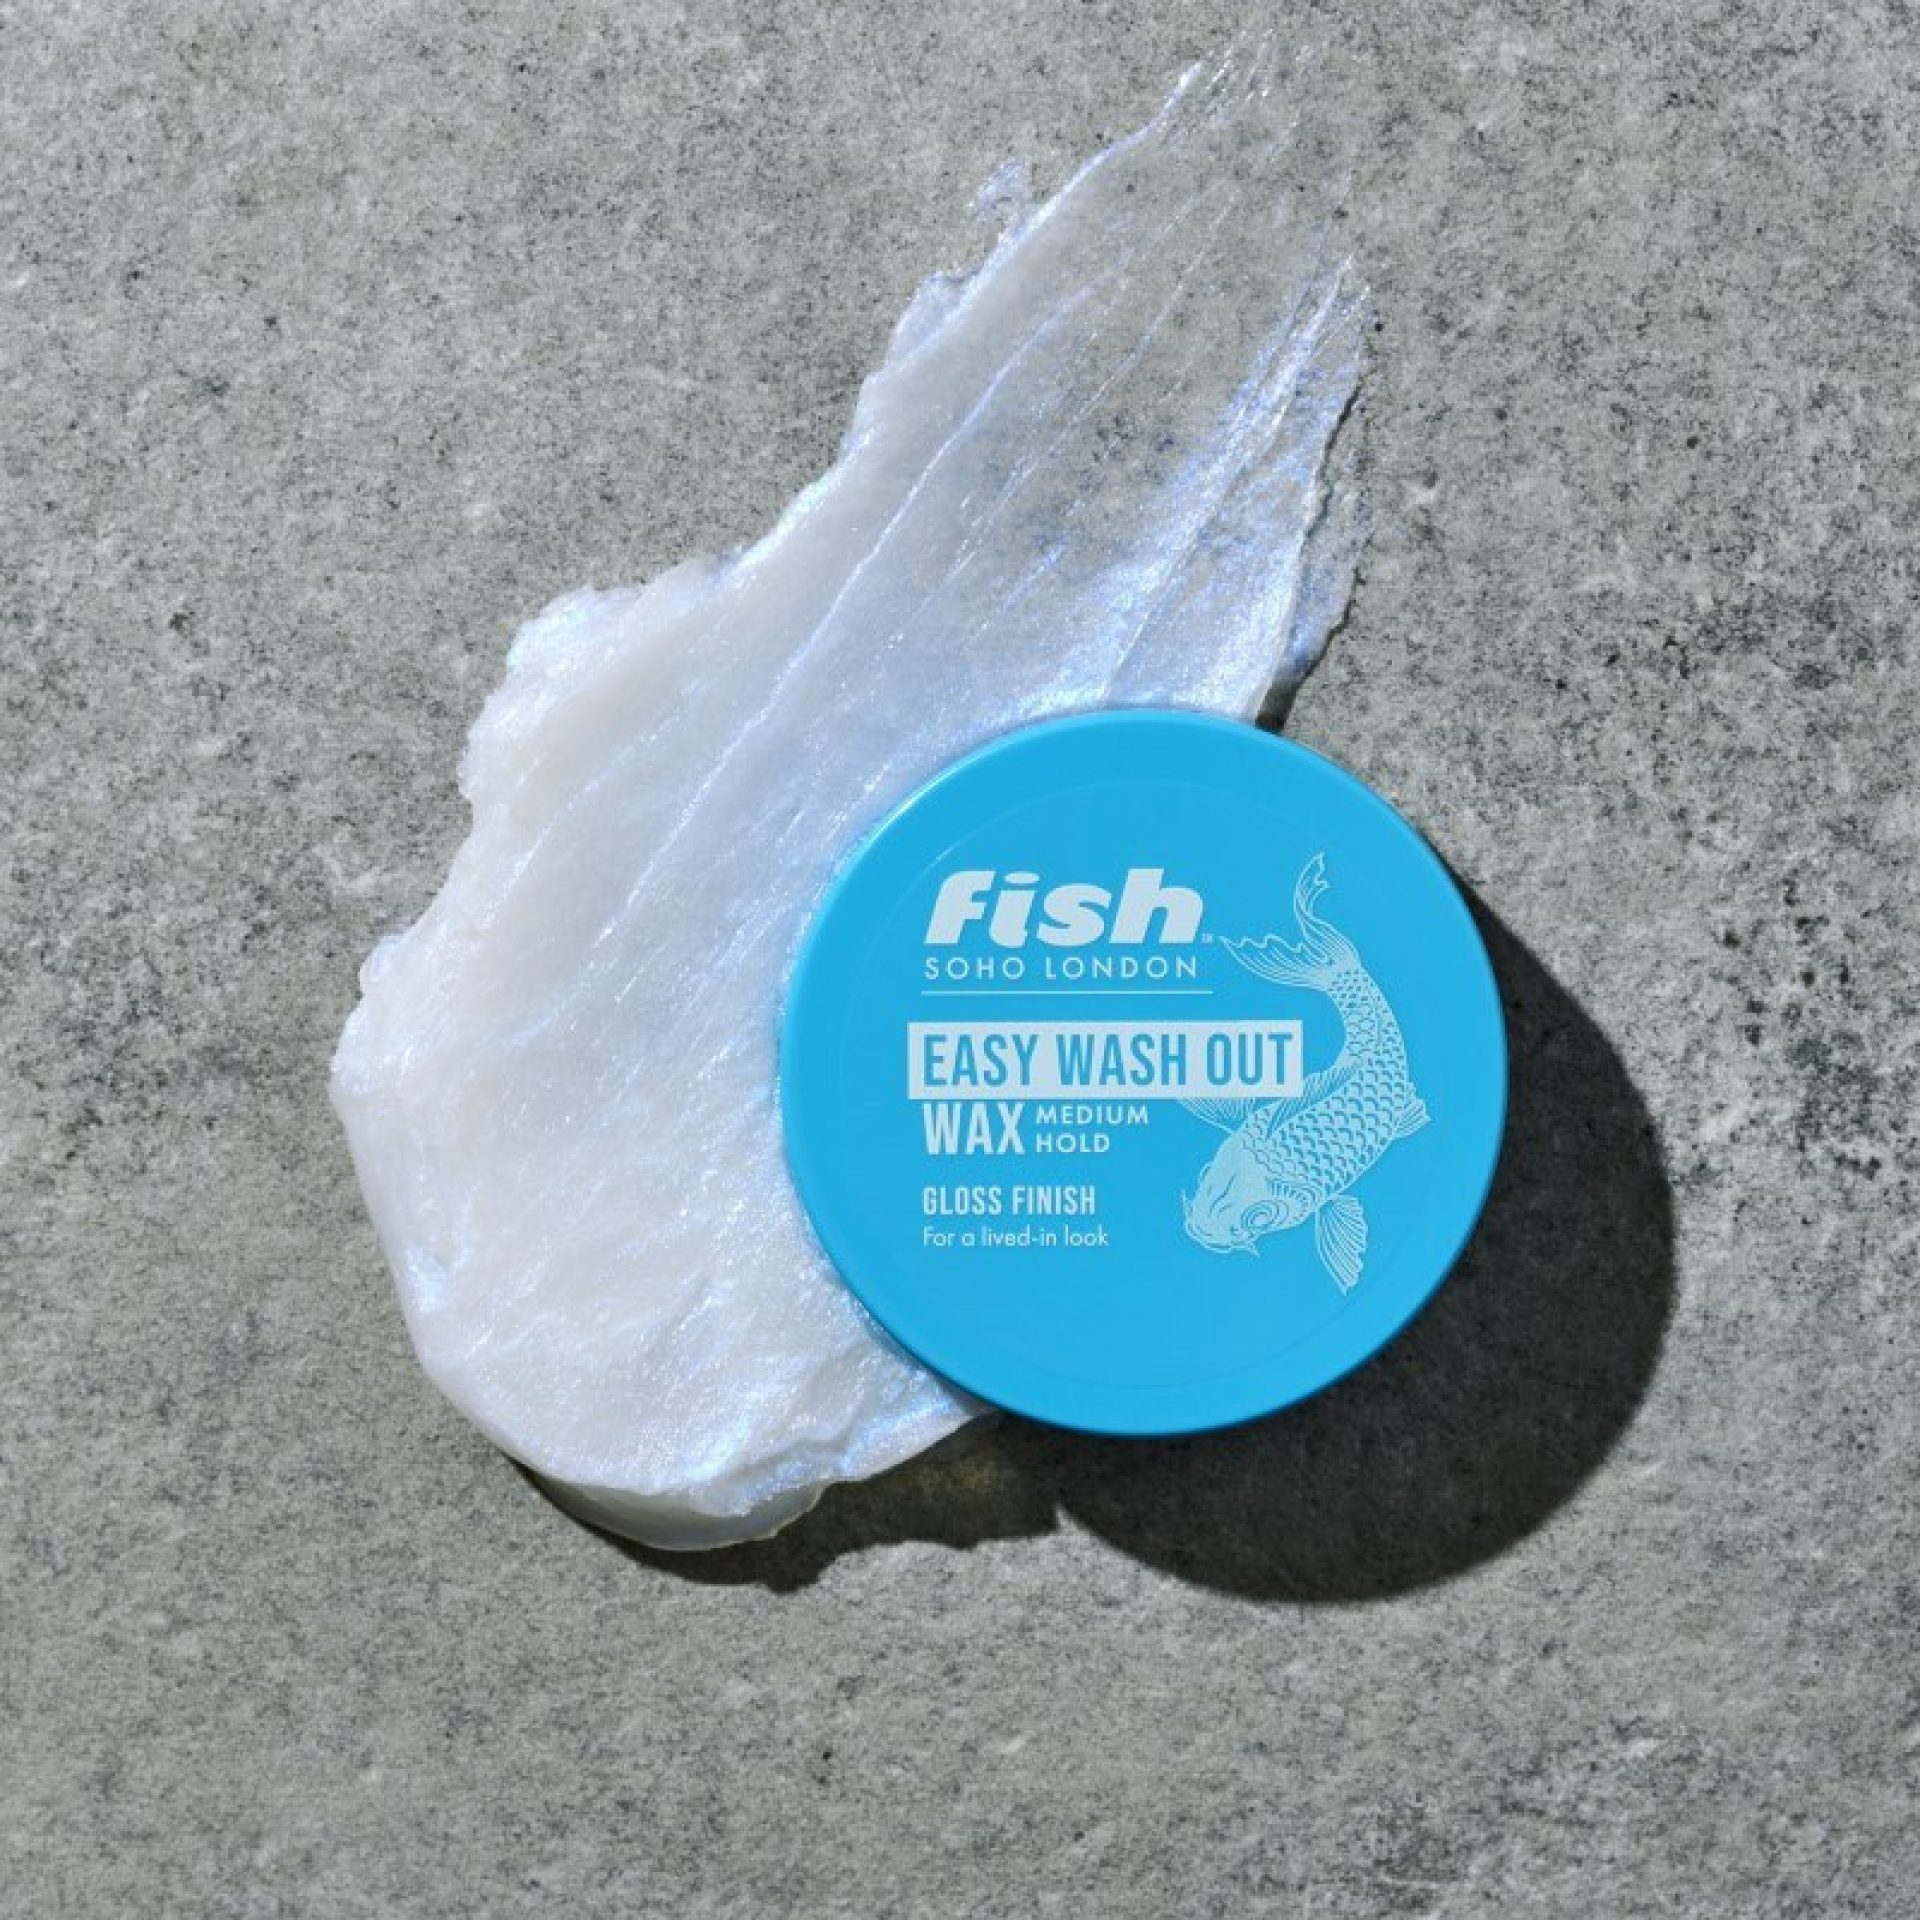 New fish soho easy wash out wax